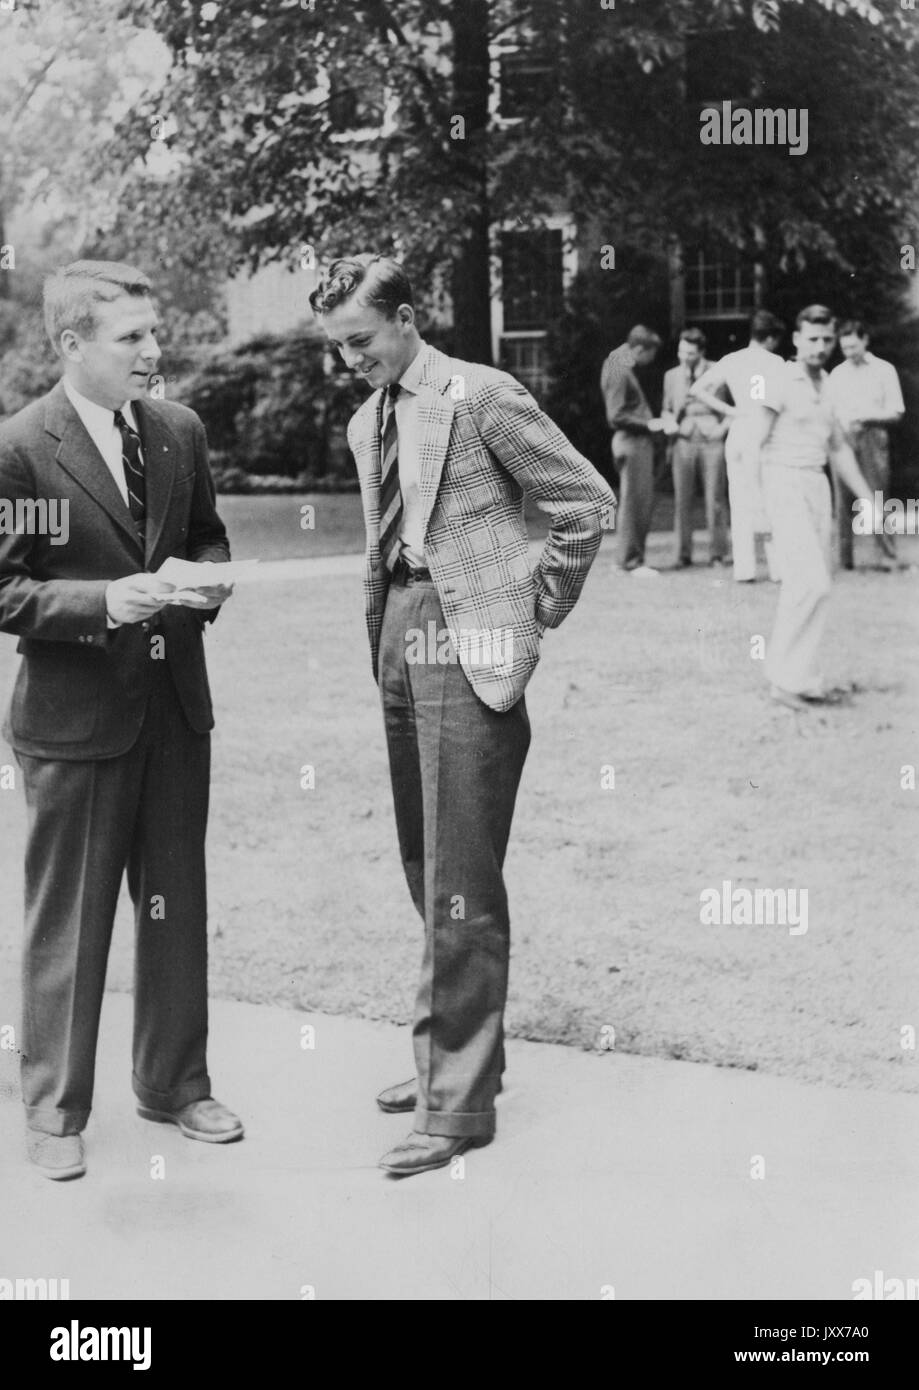 Student Life, Forrest Hood Adams, Warren Haedrich, Candid photograph, Students standing outside, 1937. Stock Photo